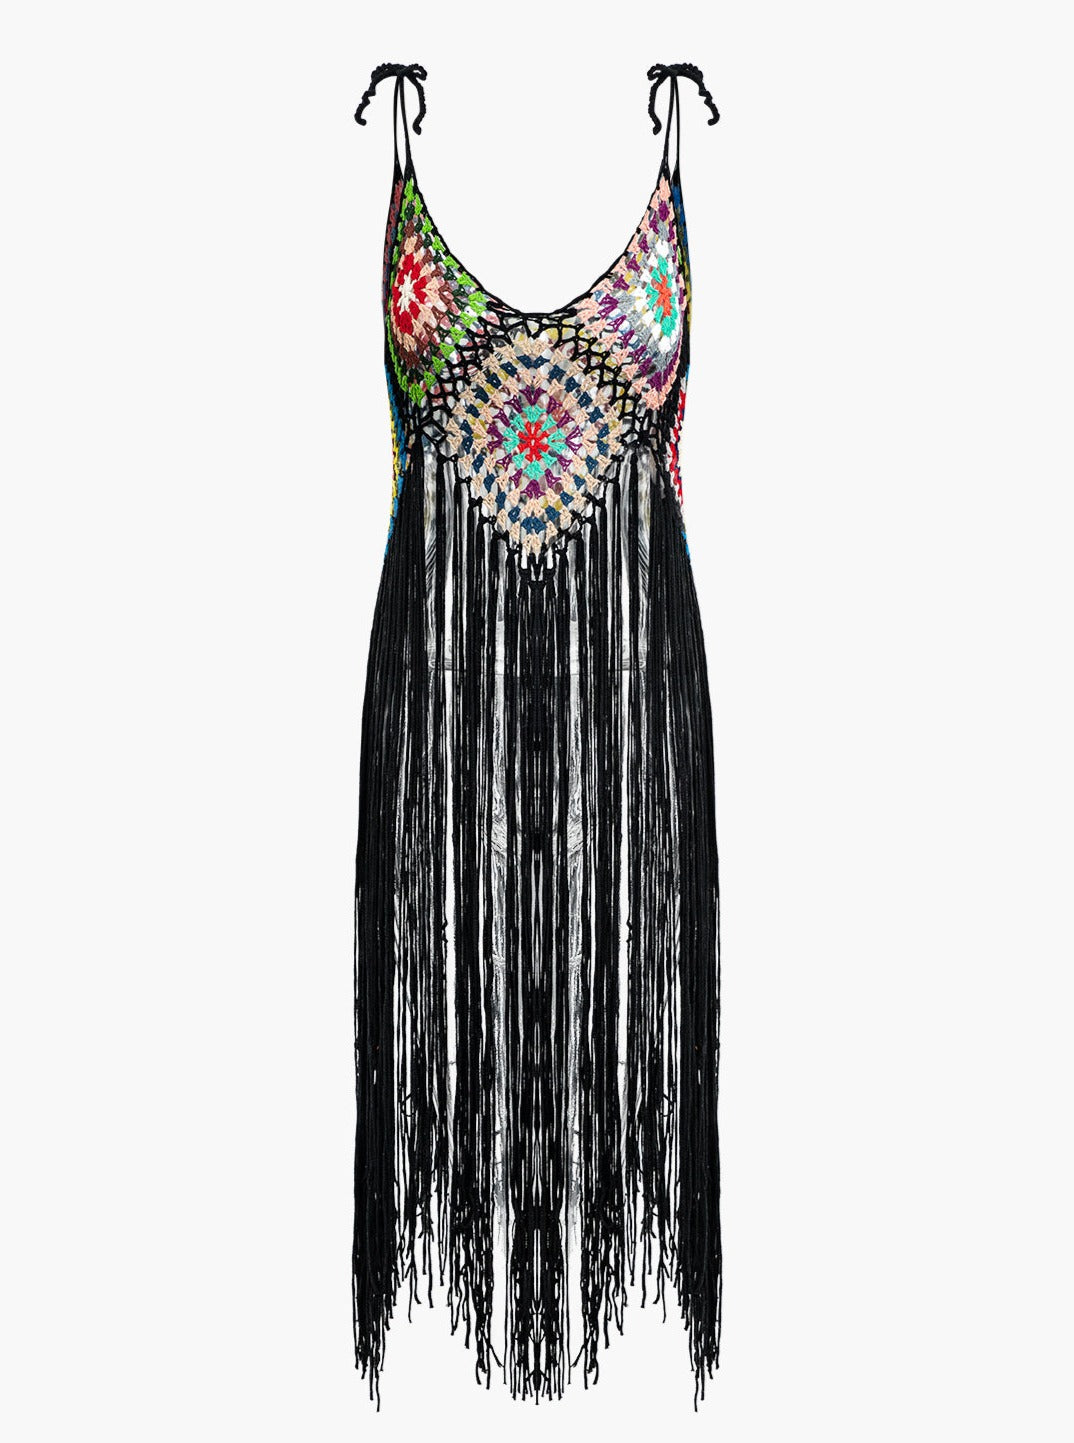 Rainbow Square Muster Fringe Crochet Knit Cami Top